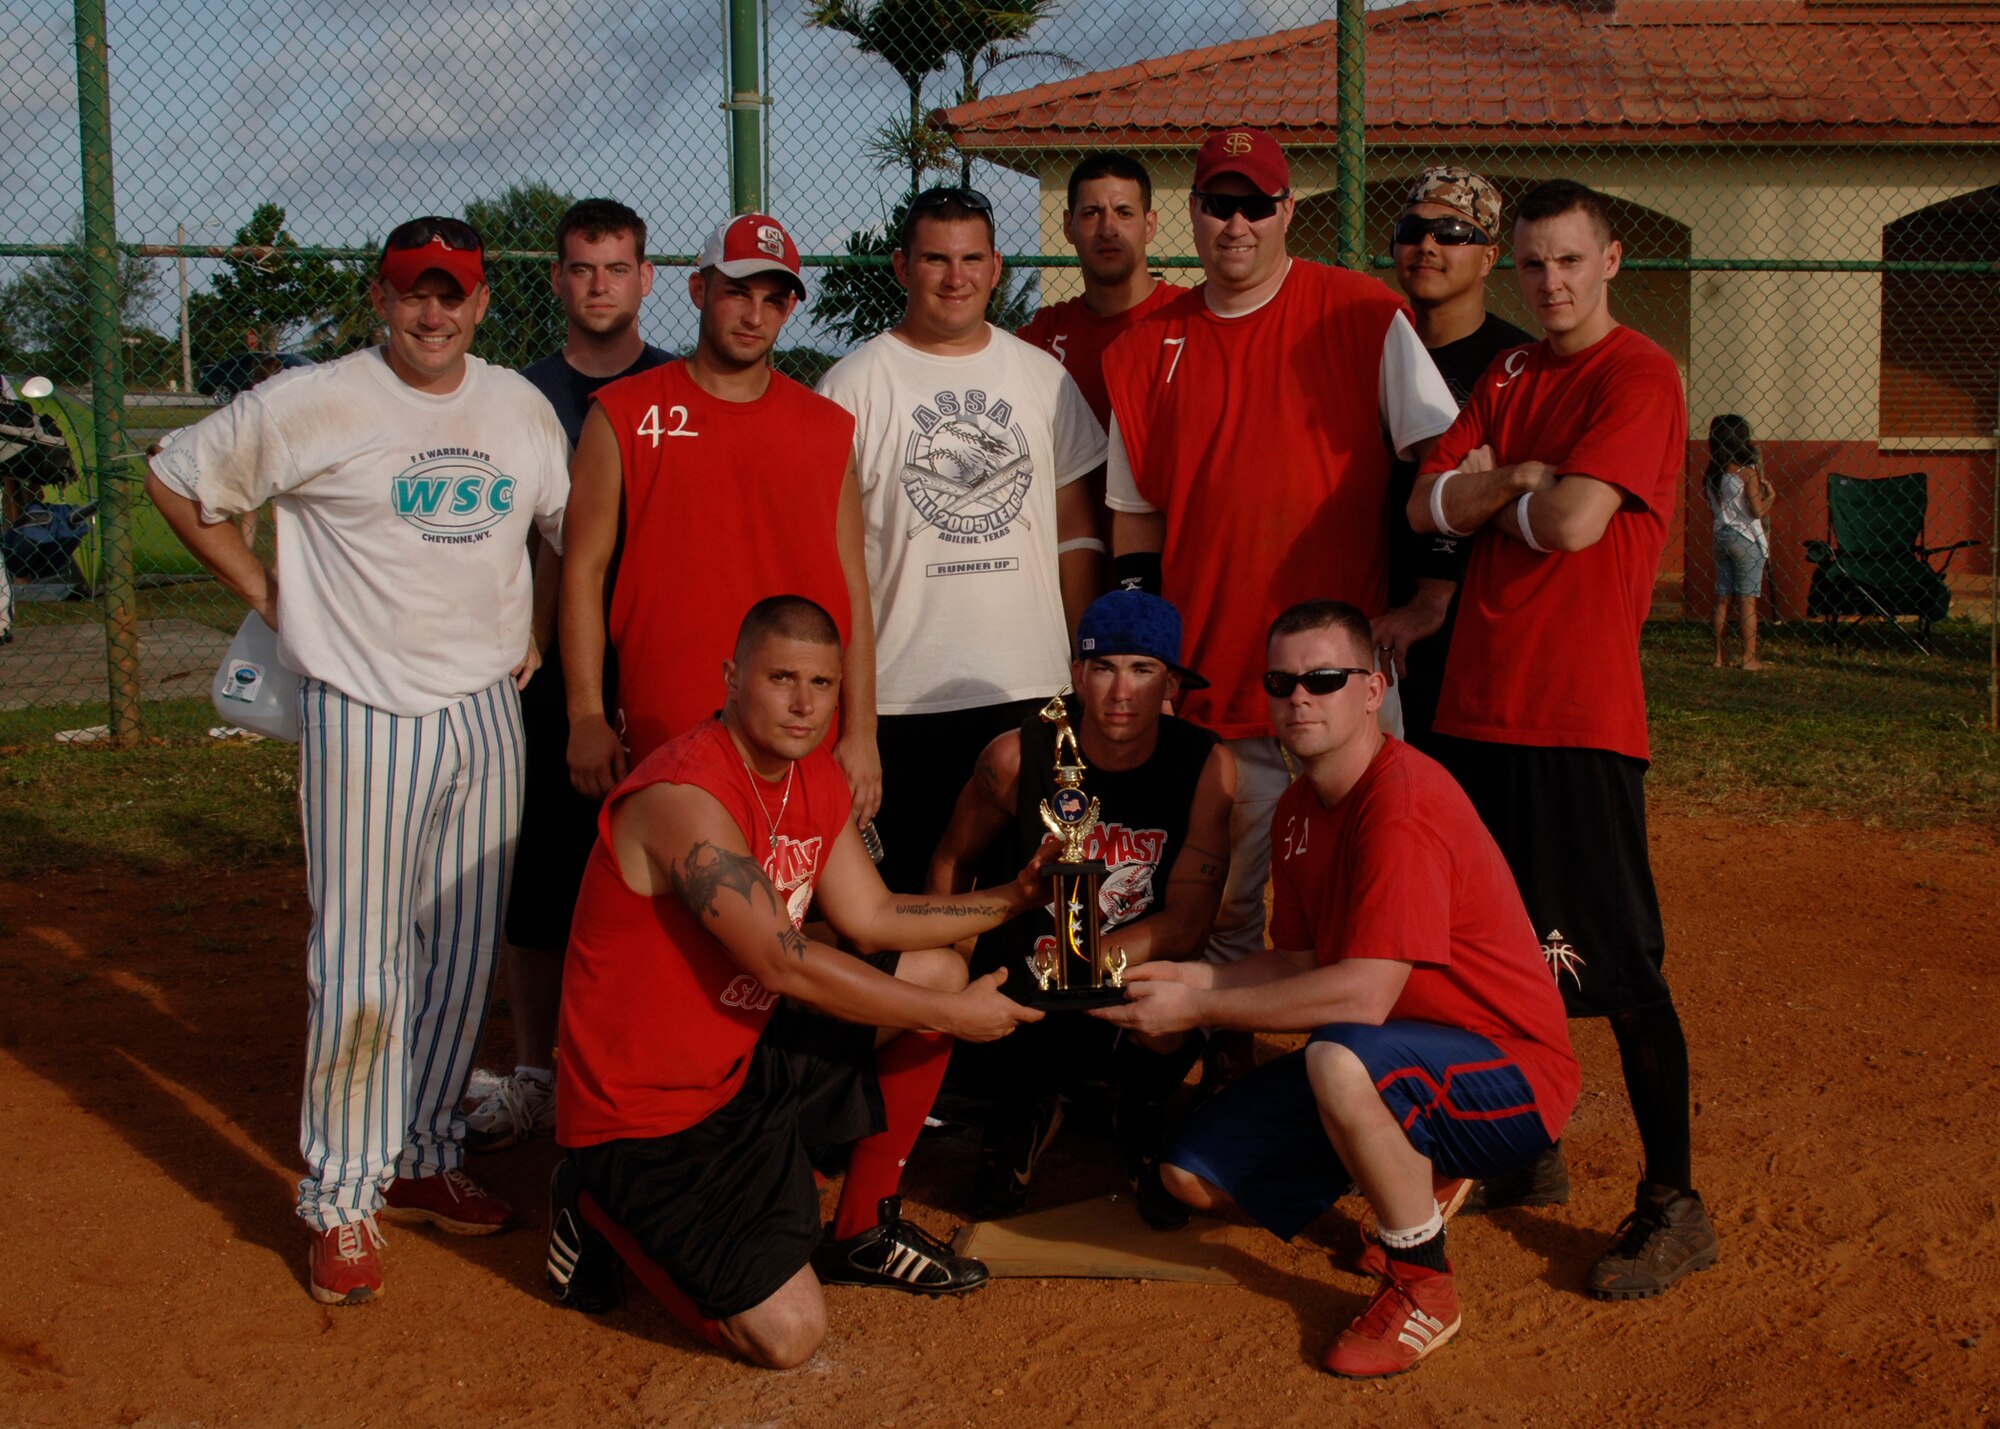 The 734th Air Mobility Squadron won the President's Day Softball Tournament Feb. 16. They defeated the 36th Munitions Squadron 17-7 in the championship game. Four teams played in a double-elimination style tournament hosted by the 36th Services Squadron Coral Reef Fitness Center. (U.S. Air Force photo by Staff Sgt. Christopher Oliver)